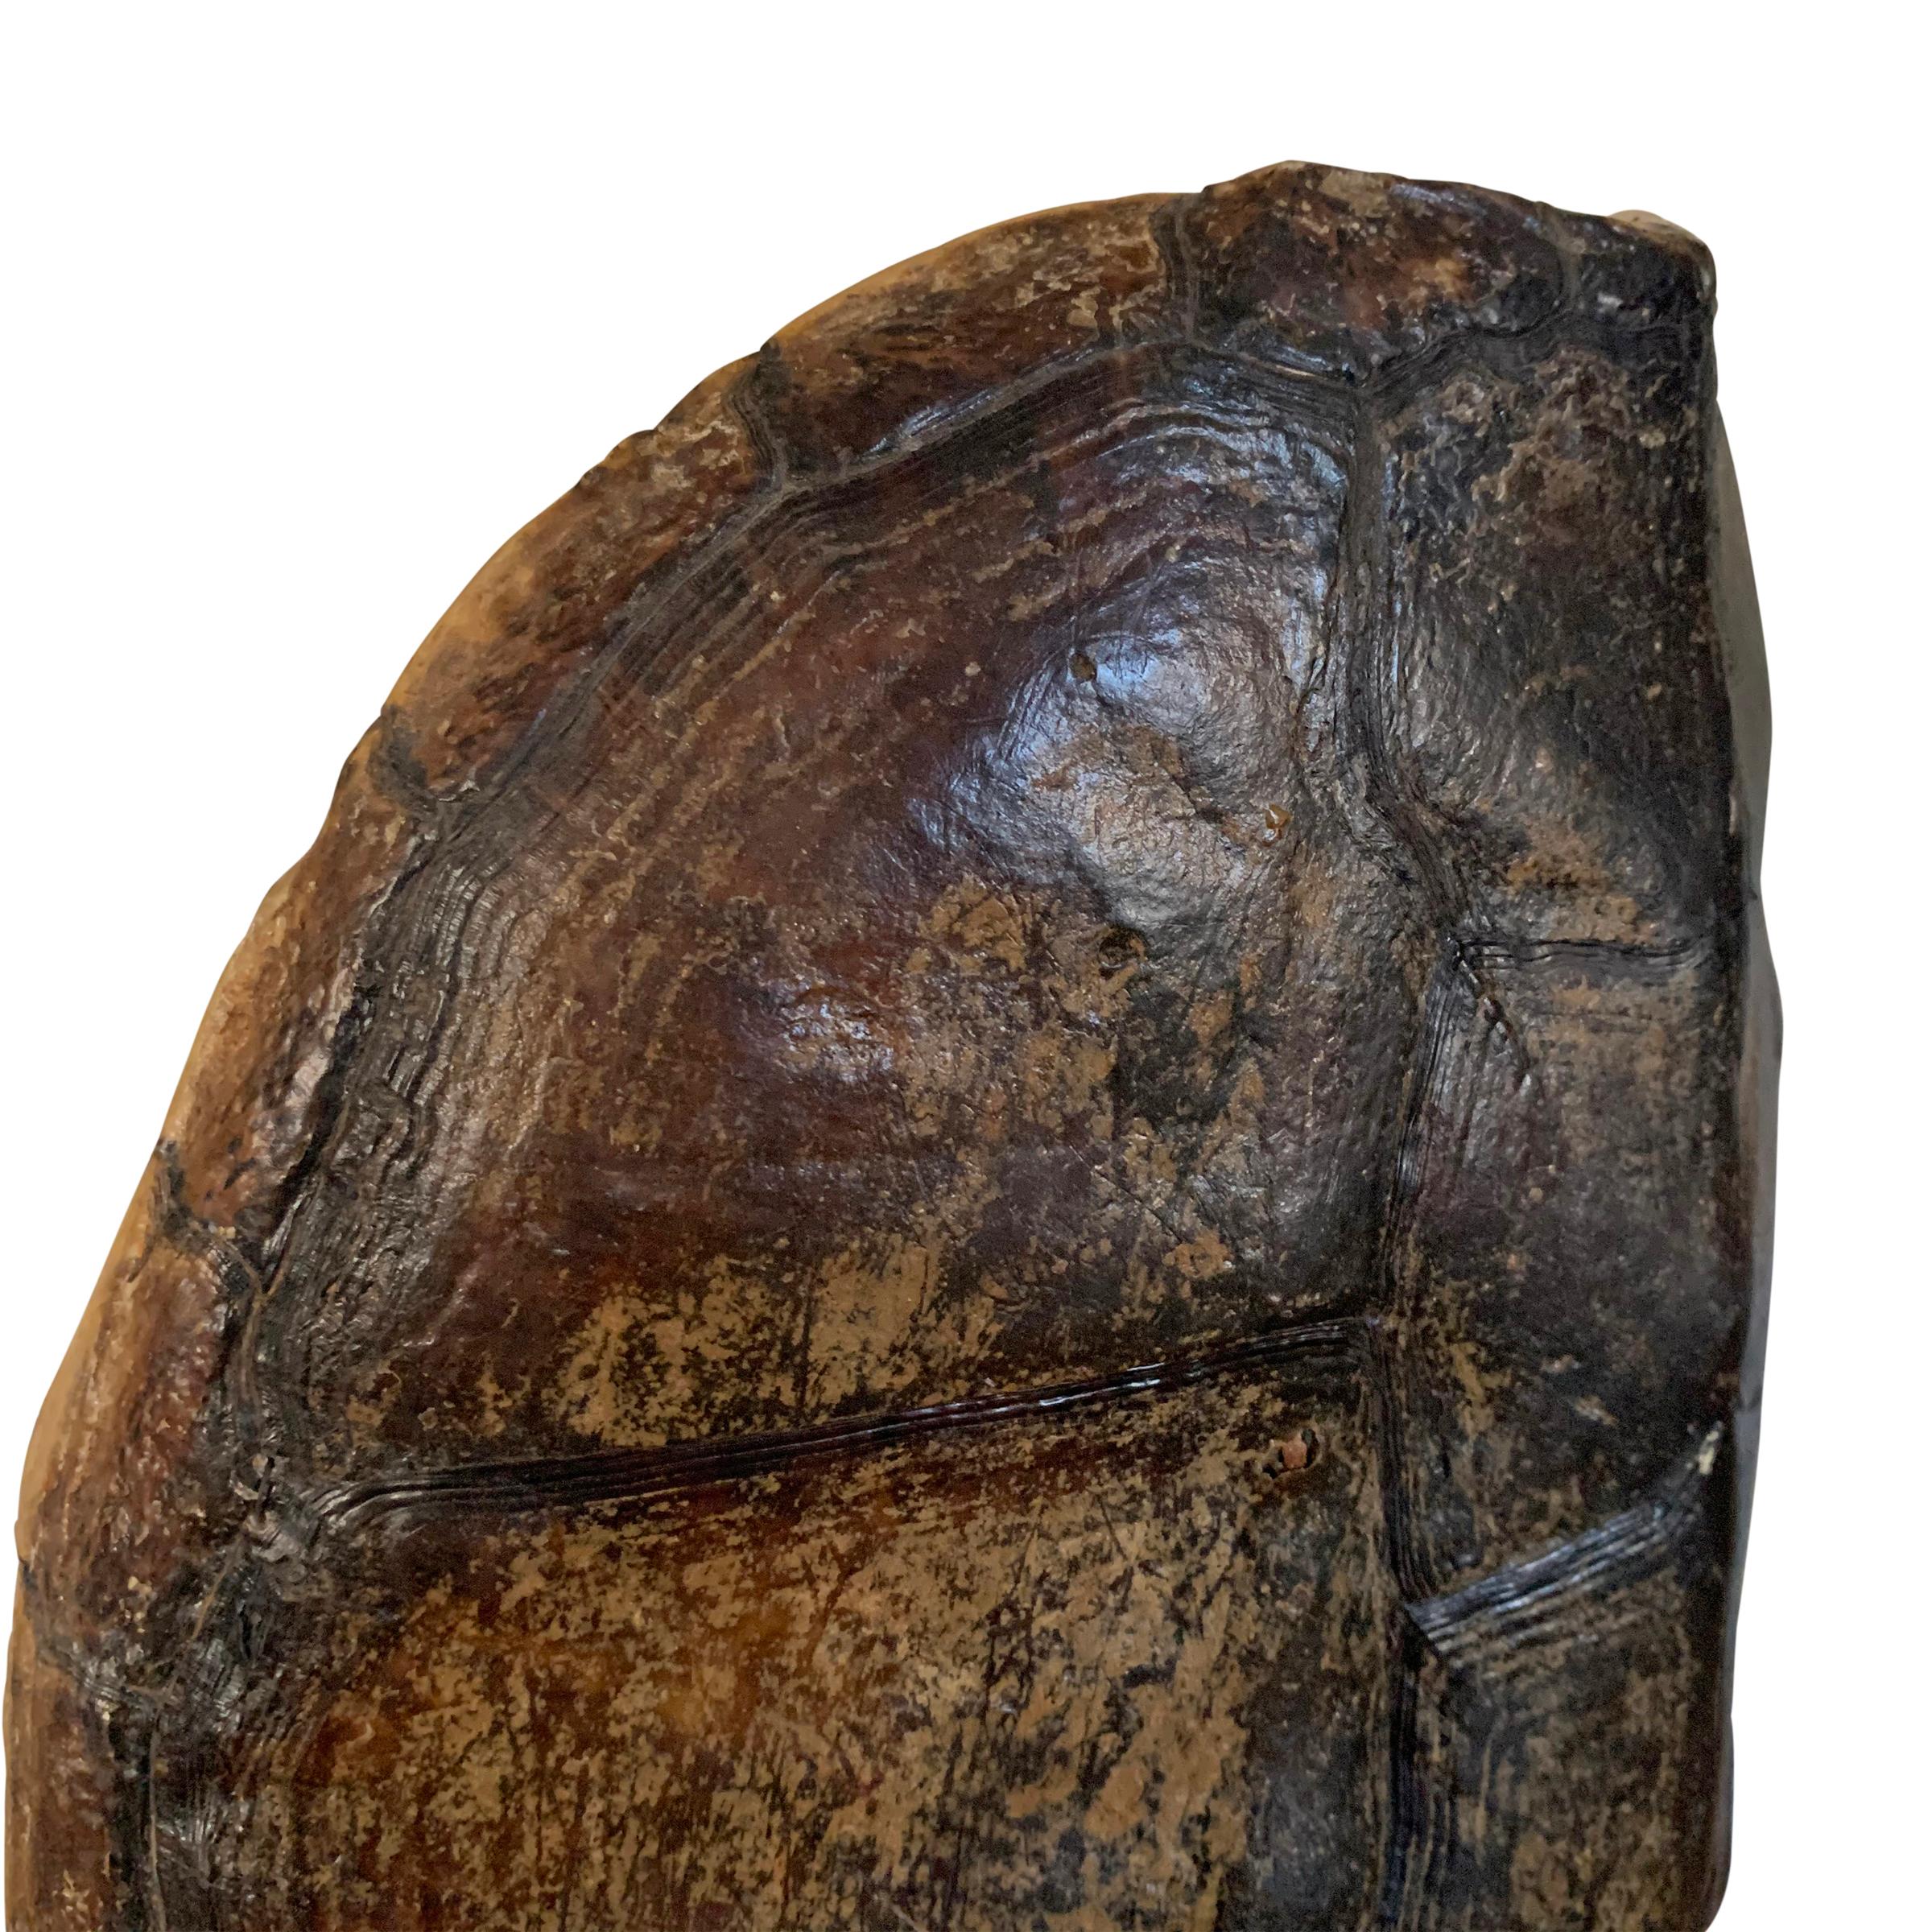 Mounted Snapping Turtle Shell 1